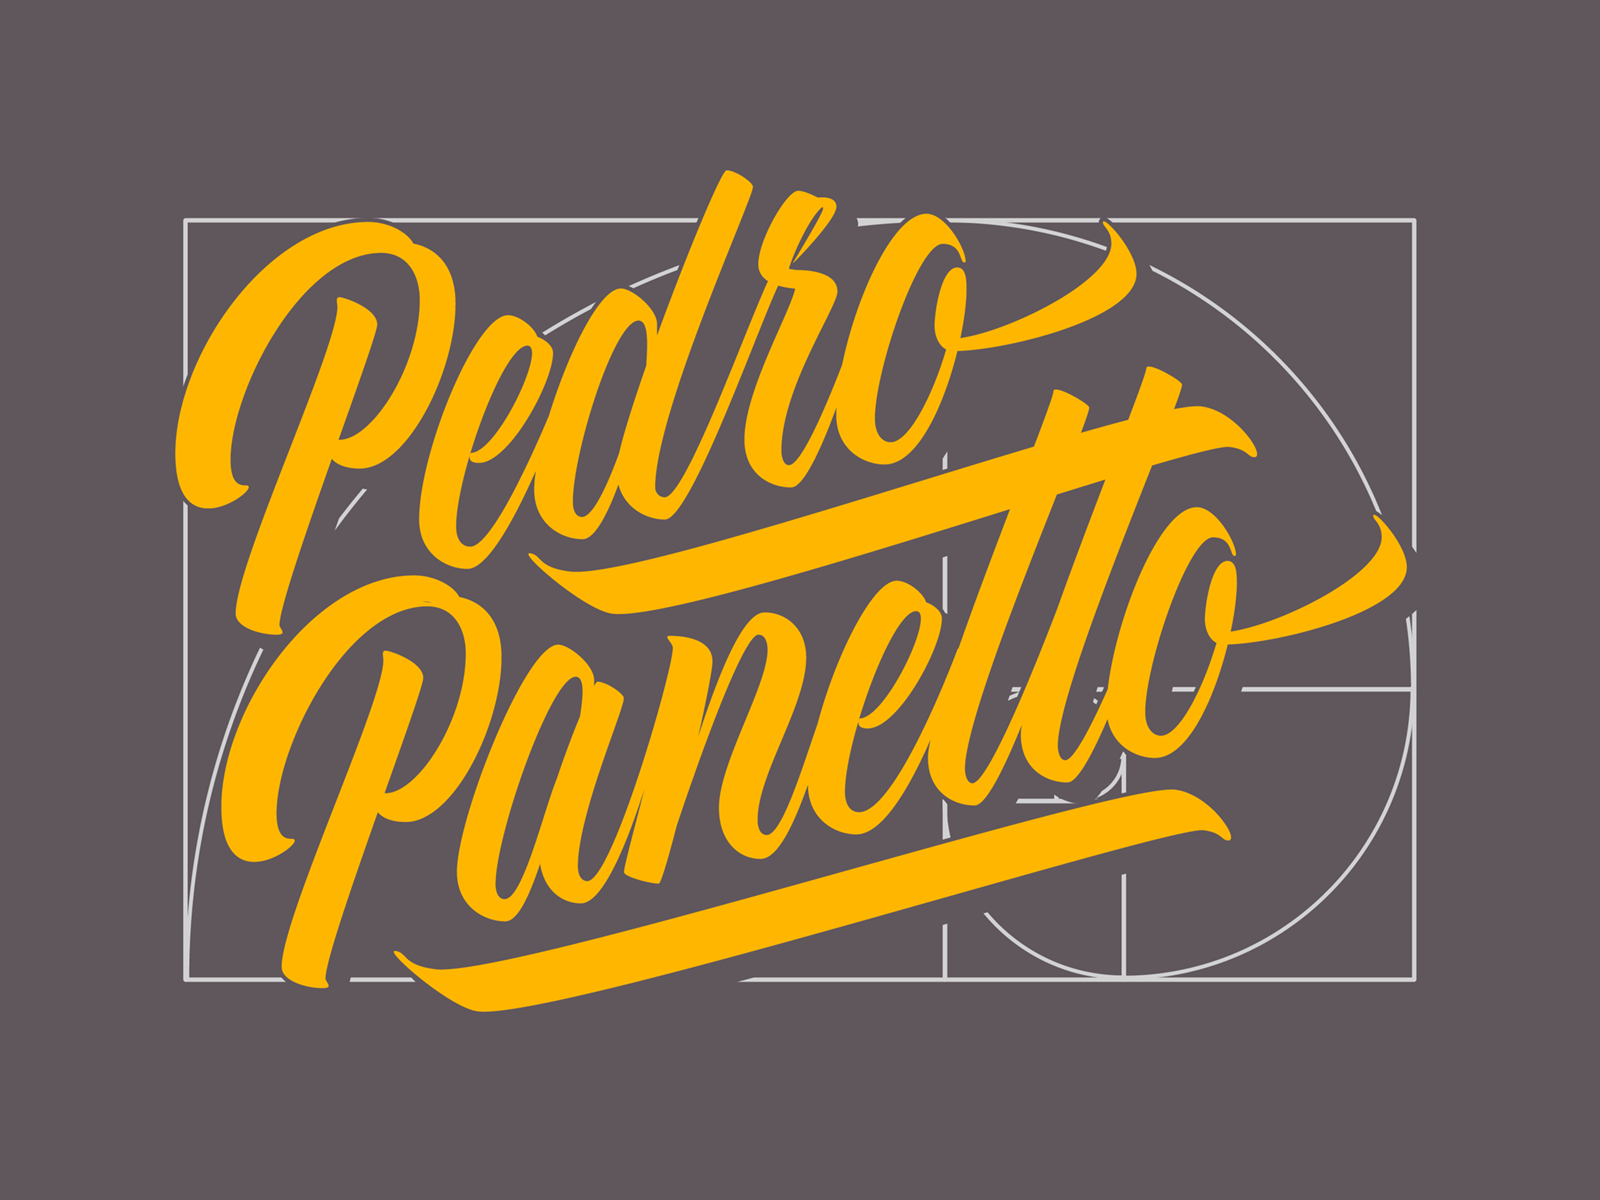 Pedro Panetto by Roberlan Borges Paresqui on Dribbble